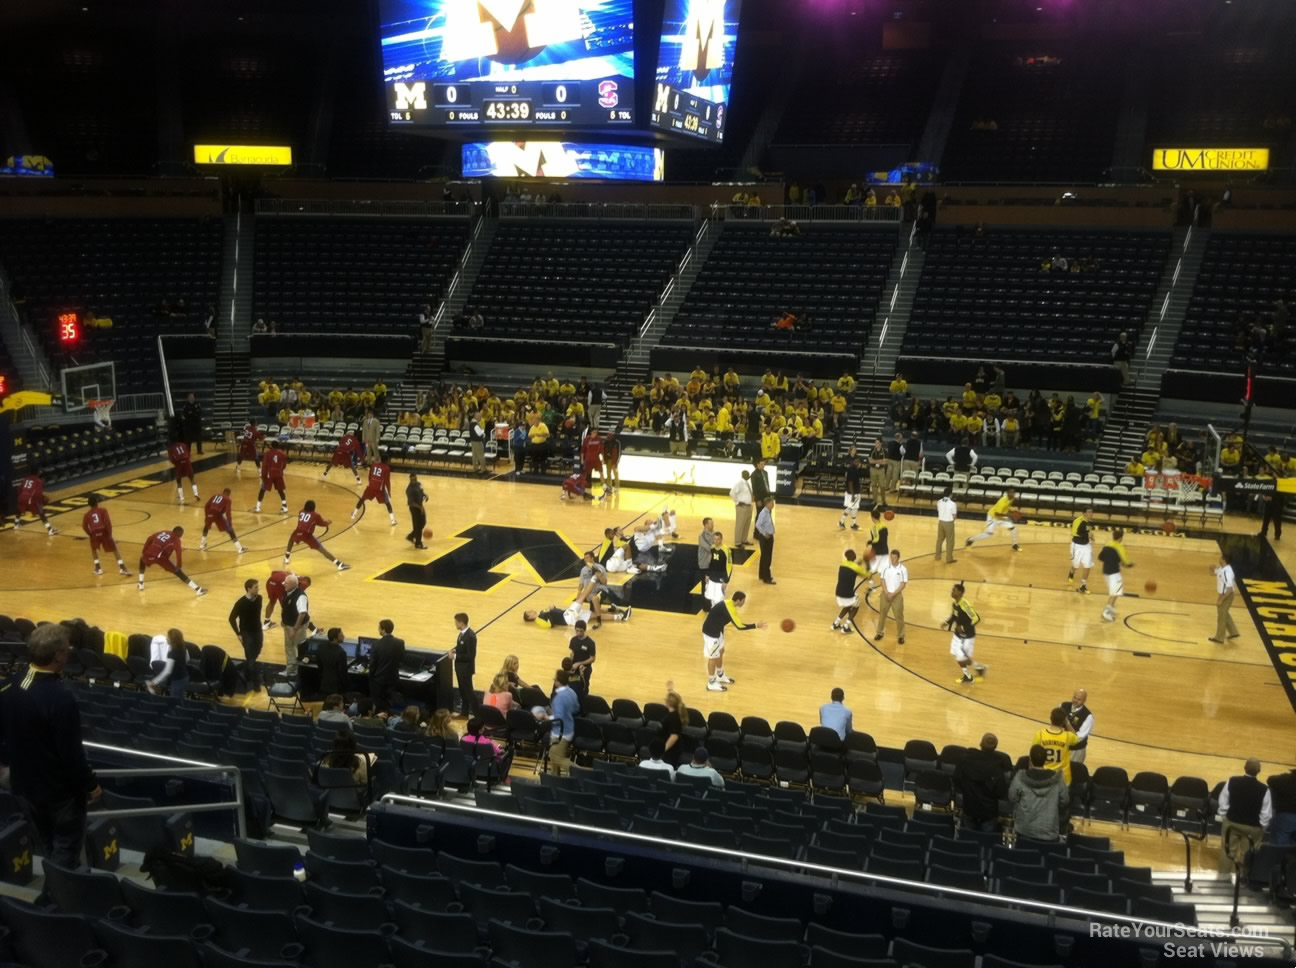 section 104, row 16 seat view  - crisler center